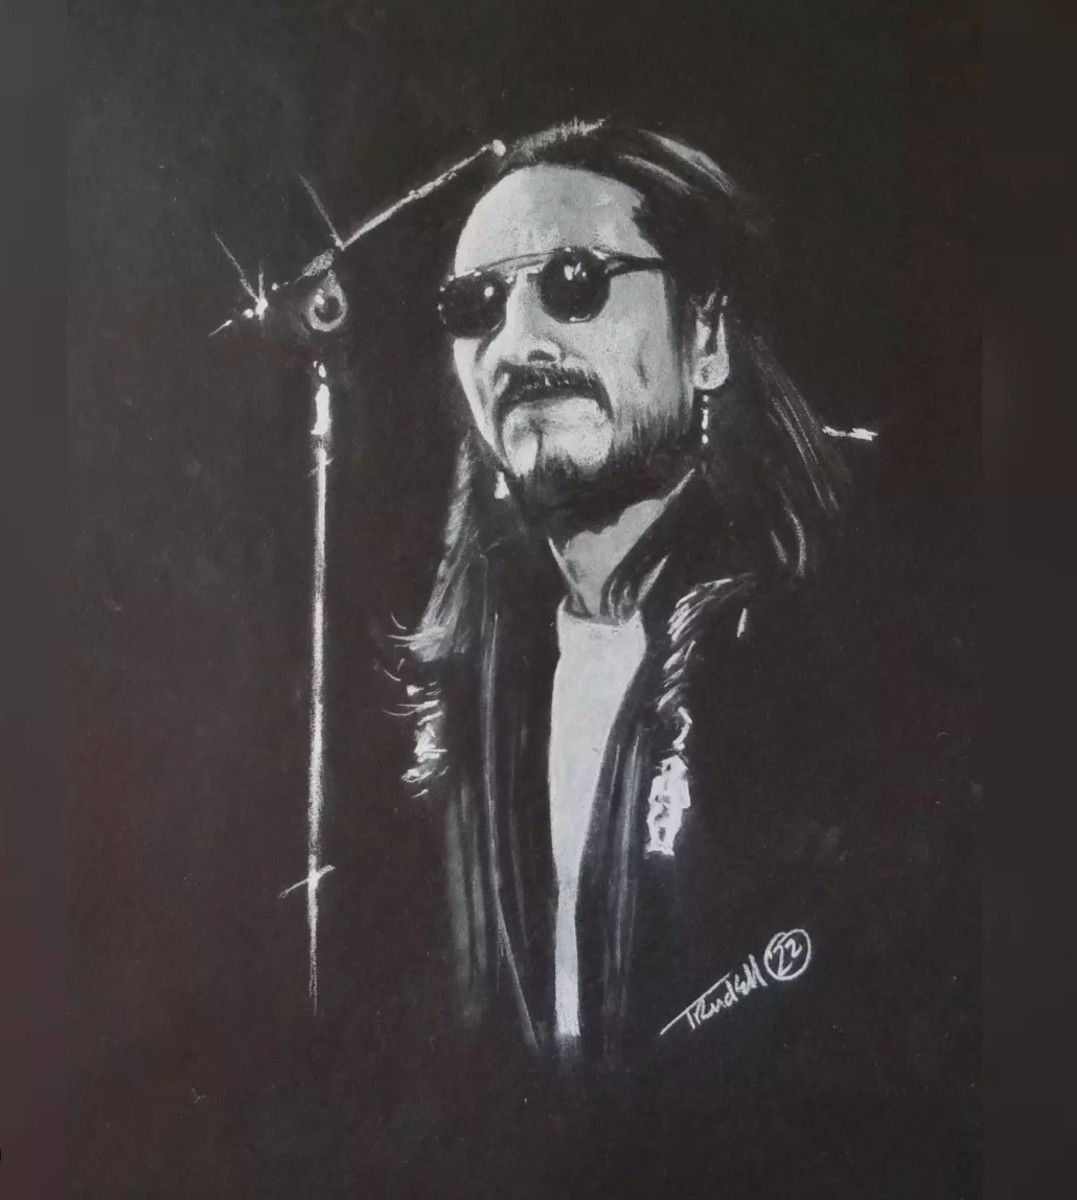 This portrait by artist Wovoka Trudell, Santee Dakota, of his father — storied political activist, poet and musician John Trudell - will be featured in an exhibit of Wovoka's portraits of his father at his OneSixSix gallery in Las Vegas, New Mexico from Jan. 13-28, 2023.  John Trudell was involved in the occupation of Alcatraz in 1969 and became a leader in the American Indian Movement.  He died in 2015. (Photo courtesy of Wovoka Trudell)